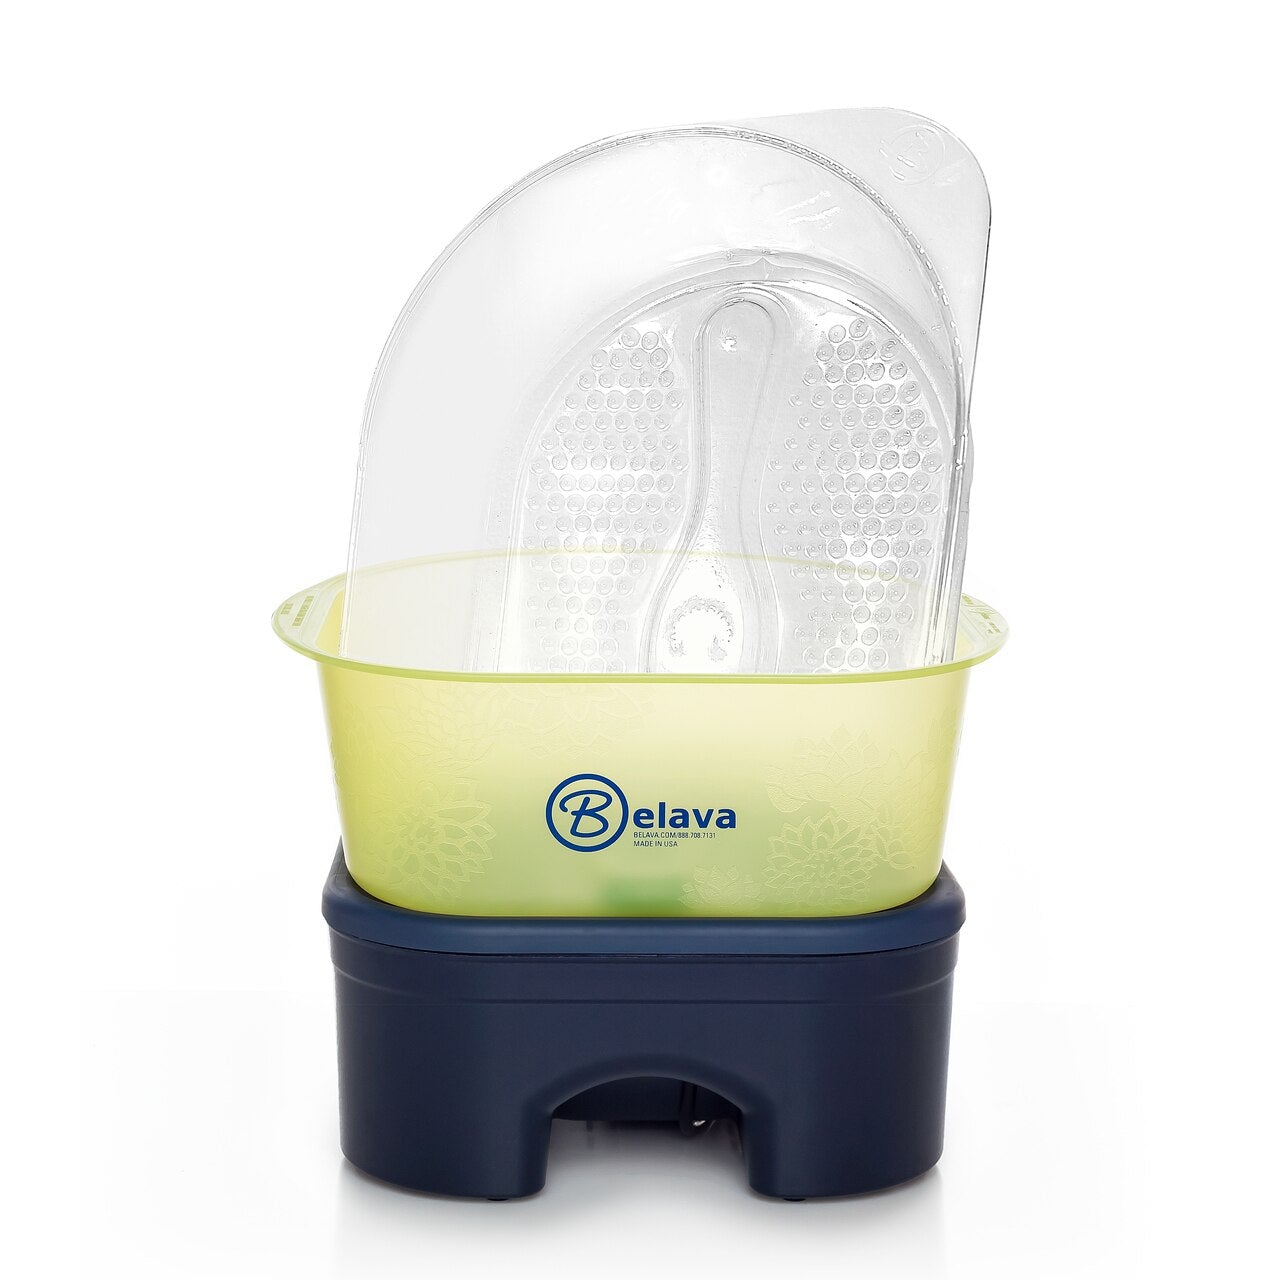 Belava Pro Foot Massager with Heater in Lime-Yellow